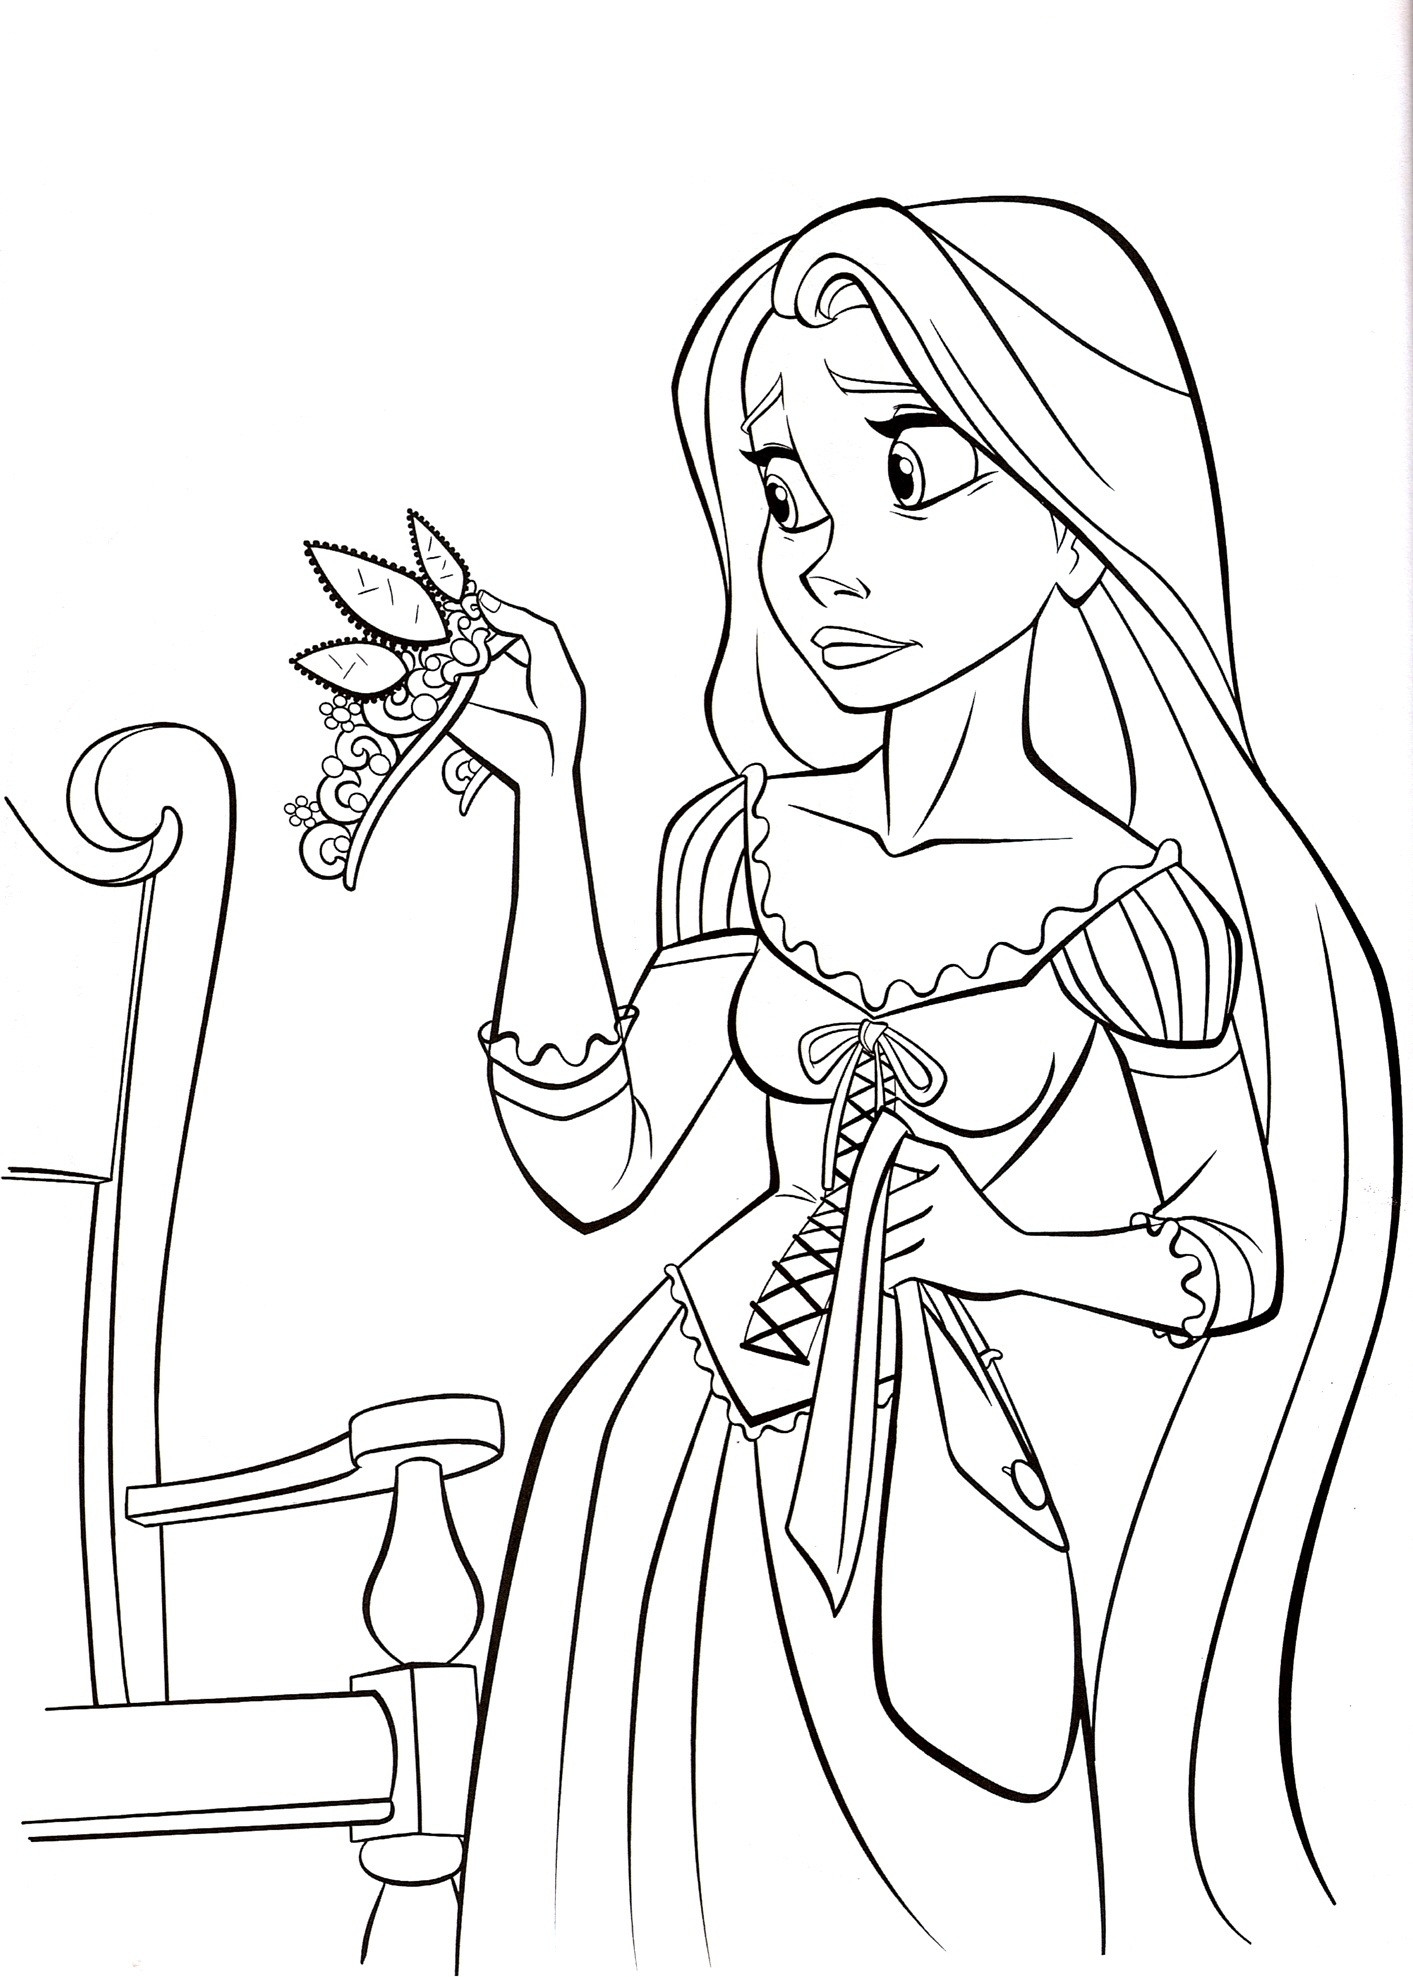 Free Disney Coloring Pages For Kids
 Free Printable Tangled Coloring Pages For Kids